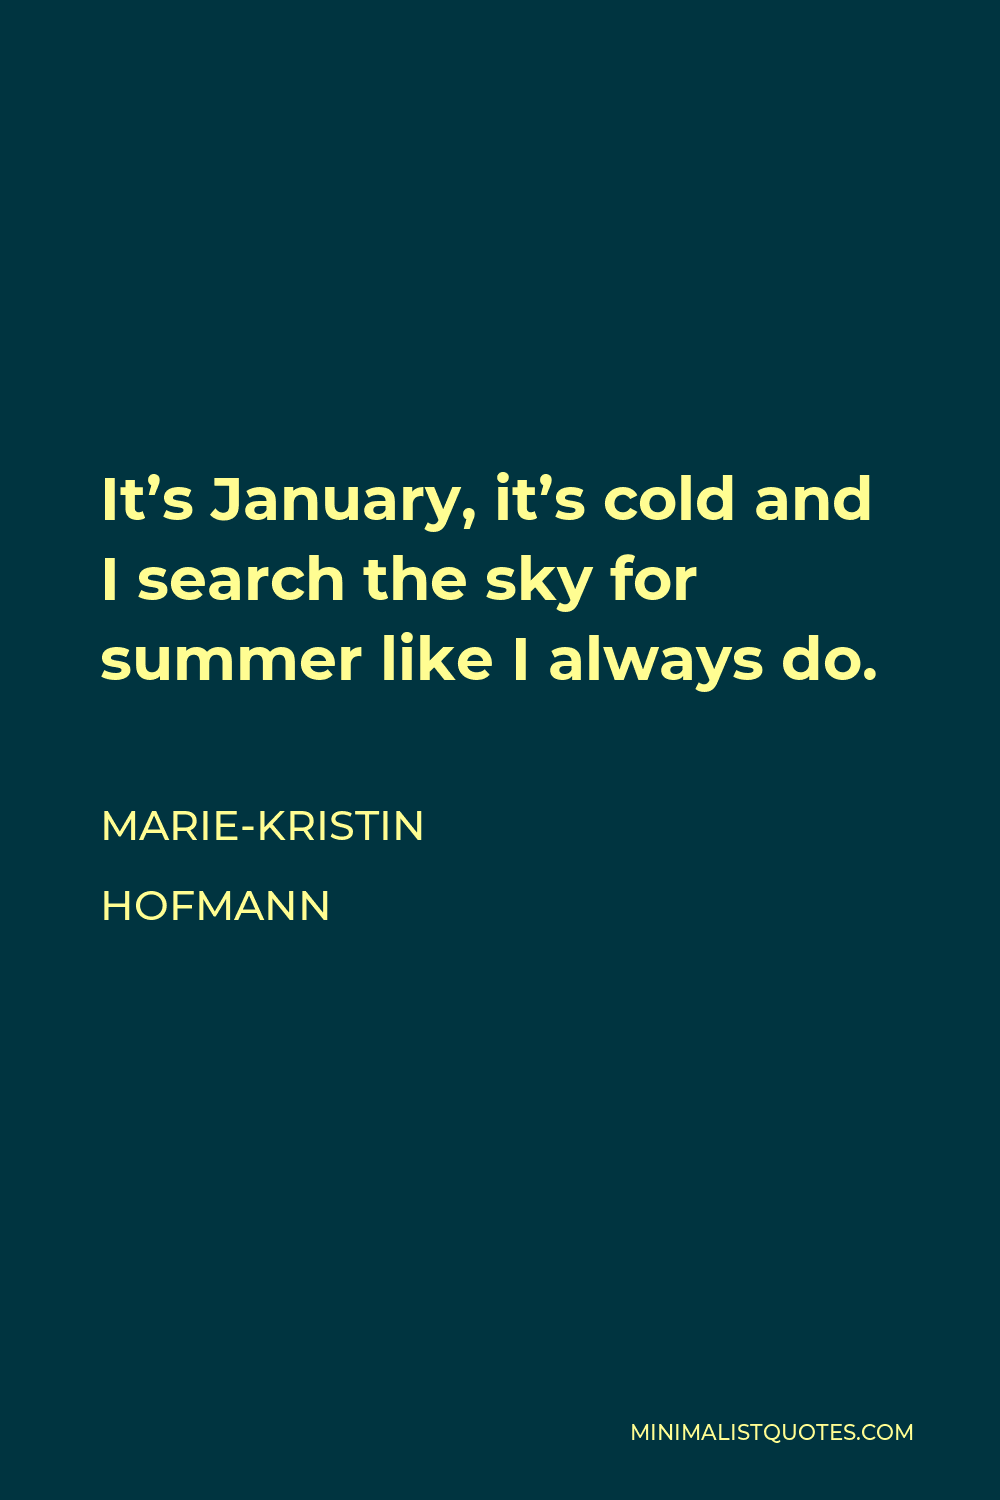 Marie-Kristin Hofmann Quote - It’s january, it’s cold and I search the sky for summer like I always do.